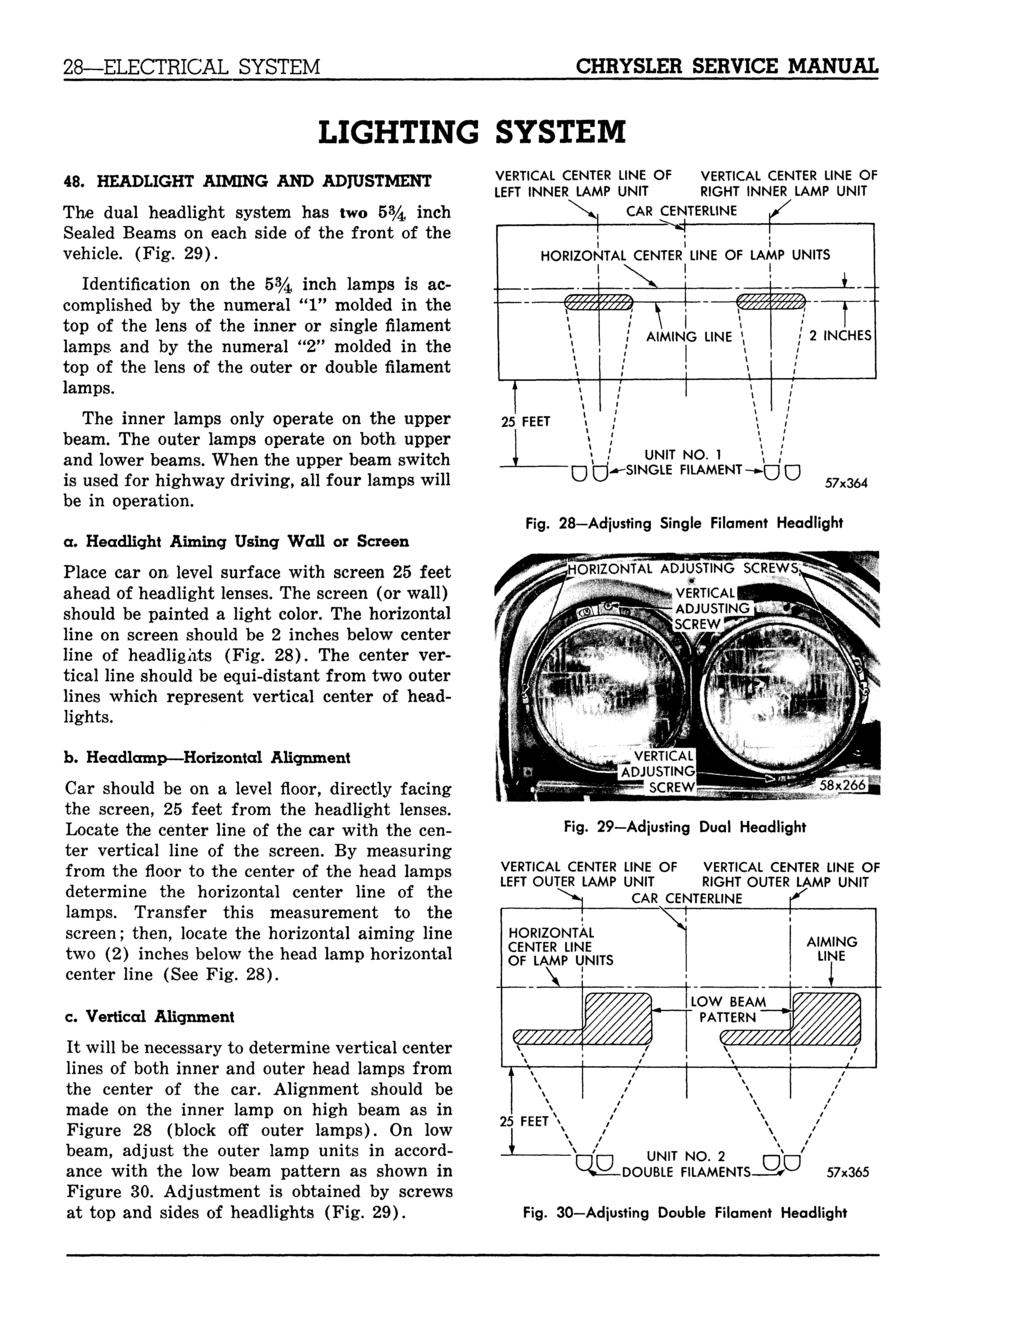 28 ELECTRICAL SYSTEM CHRYSLER SERVICE MANUAL LIGHTING SYSTEM 48. HEADLIGHT AIMING AND ADJUSTMENT The dual headlight system has two 5% inch Sealed Beams on each side of the front of the vehicle. (Fig.